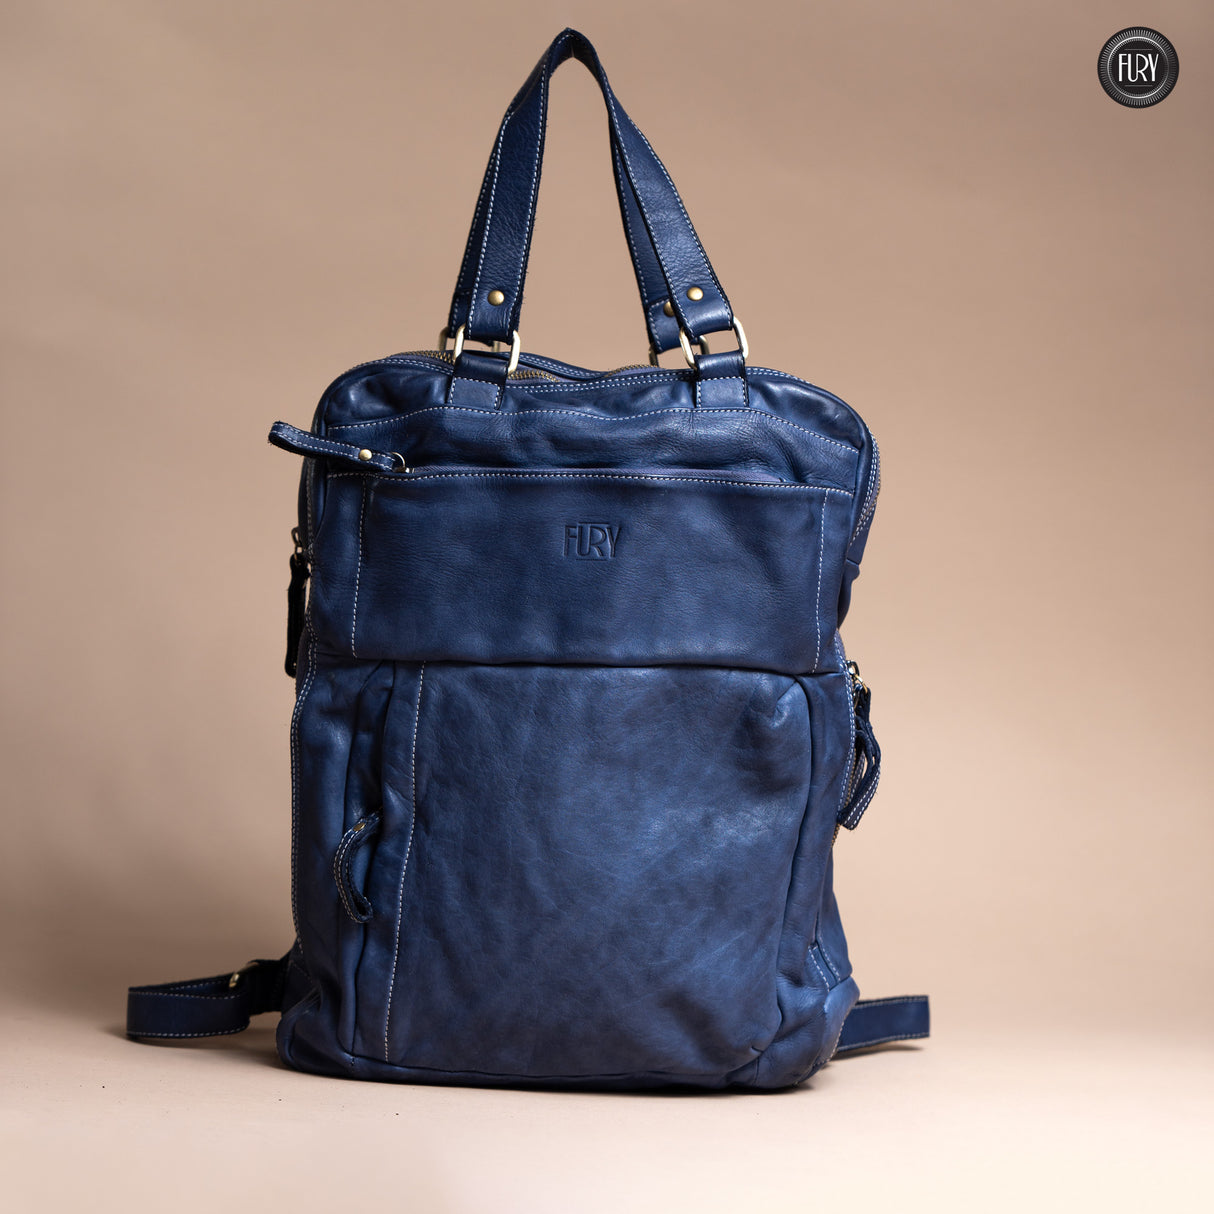 Daily unisex backpack in leather